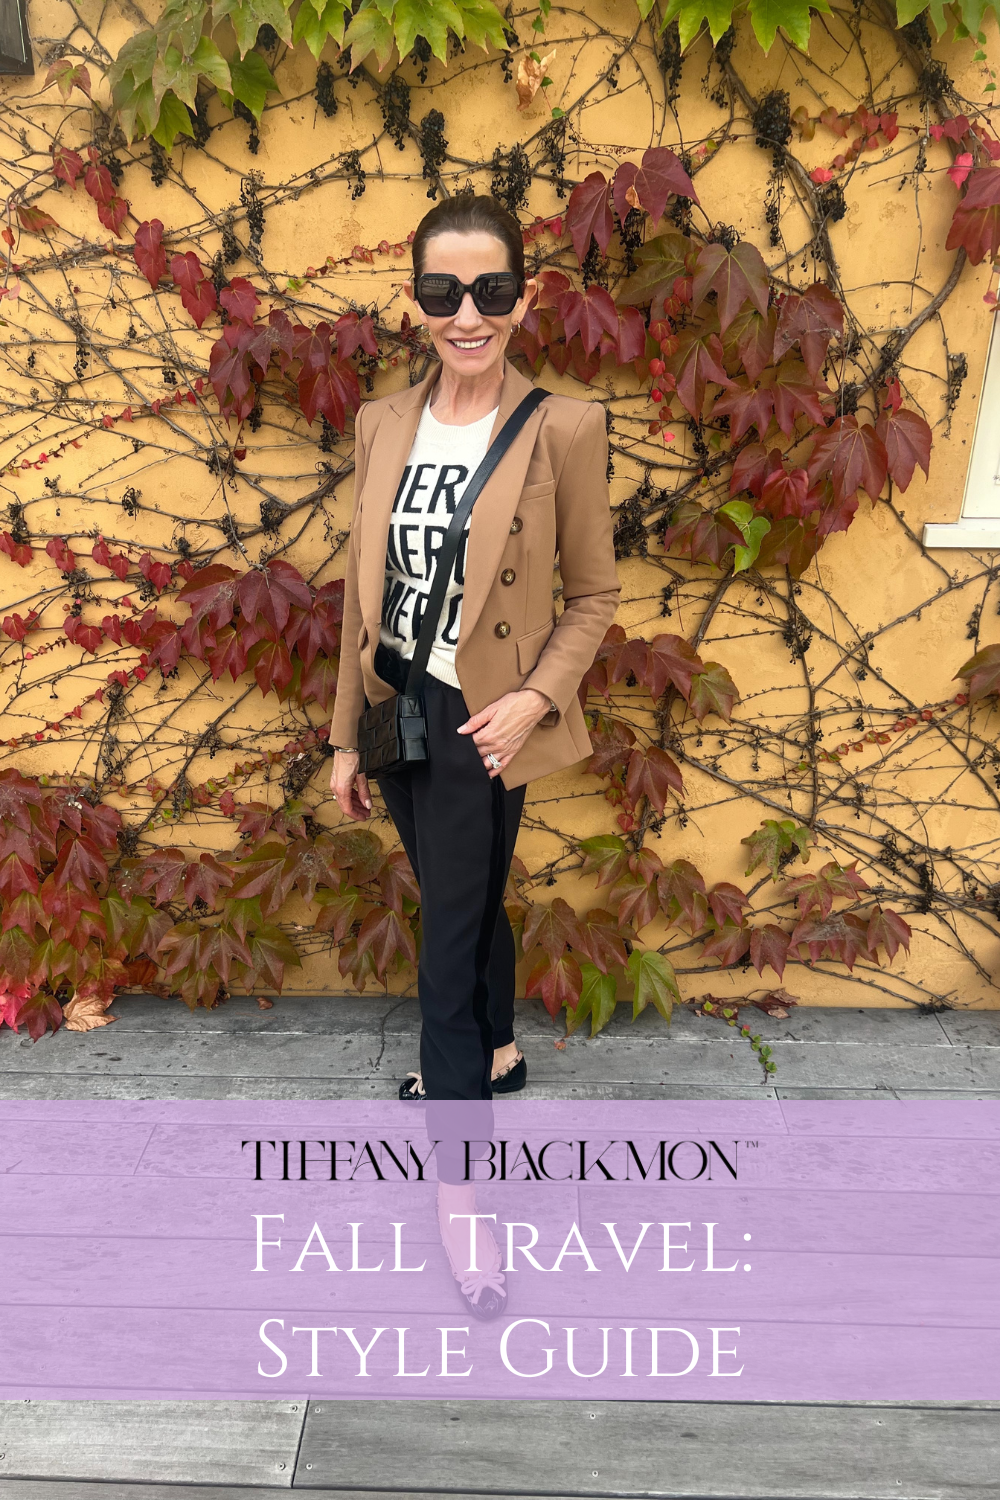 #Travel #style #looks #BigCity #Winery #SouthernCity #MountialVillage #Mountain #packing #clothes #layers #Tips #Outfit #style #pieces #fashion #fall #looks 